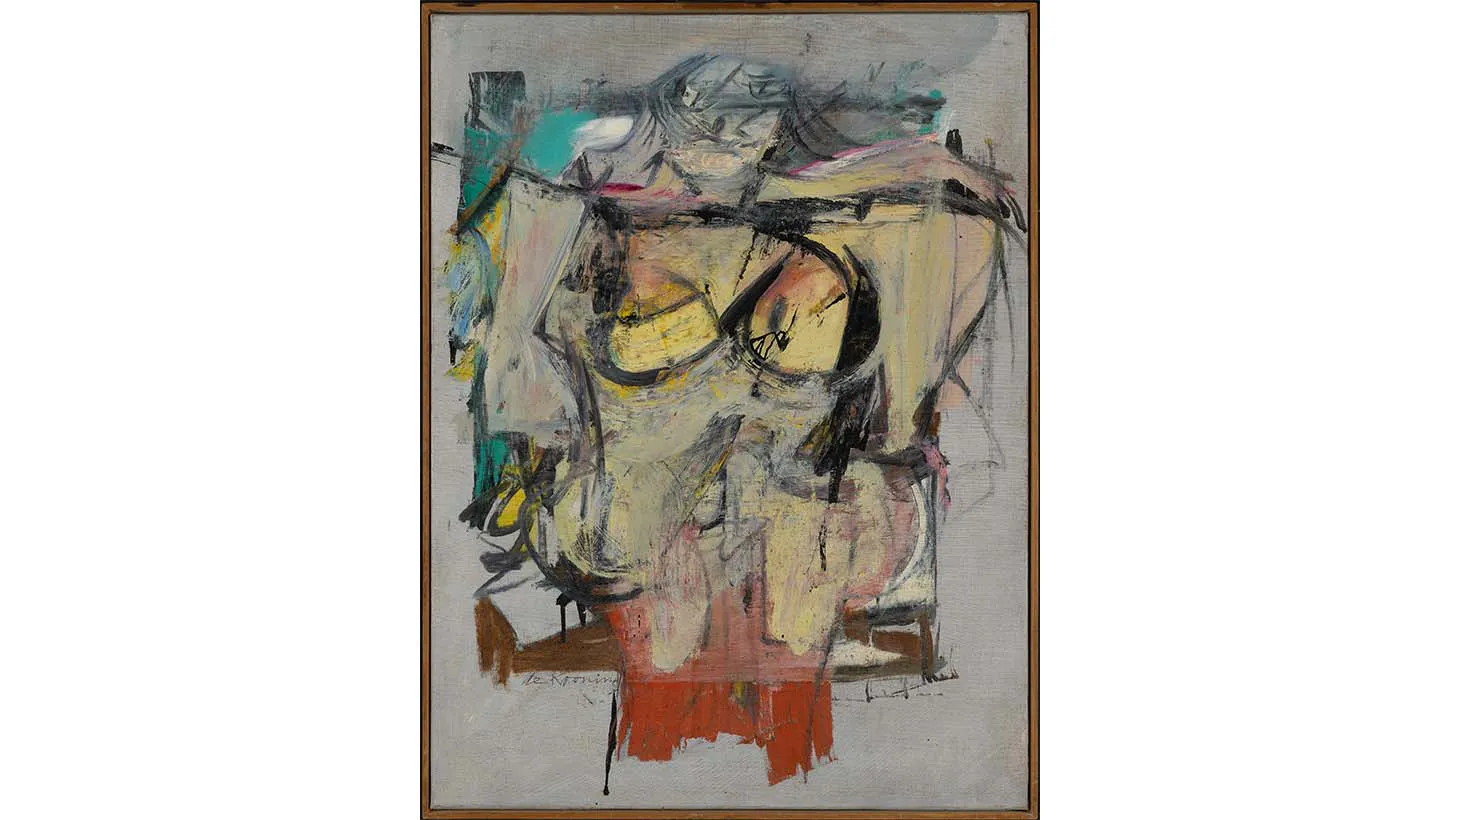 Willem de Kooning’s “Woman-Ochre” (1954-1955) is on display at the Getty Center from June 7-August 28. The painting suffered a great deal of damage during the heist and had to undergo an intense, meticulous conservation process once it came to the Getty.